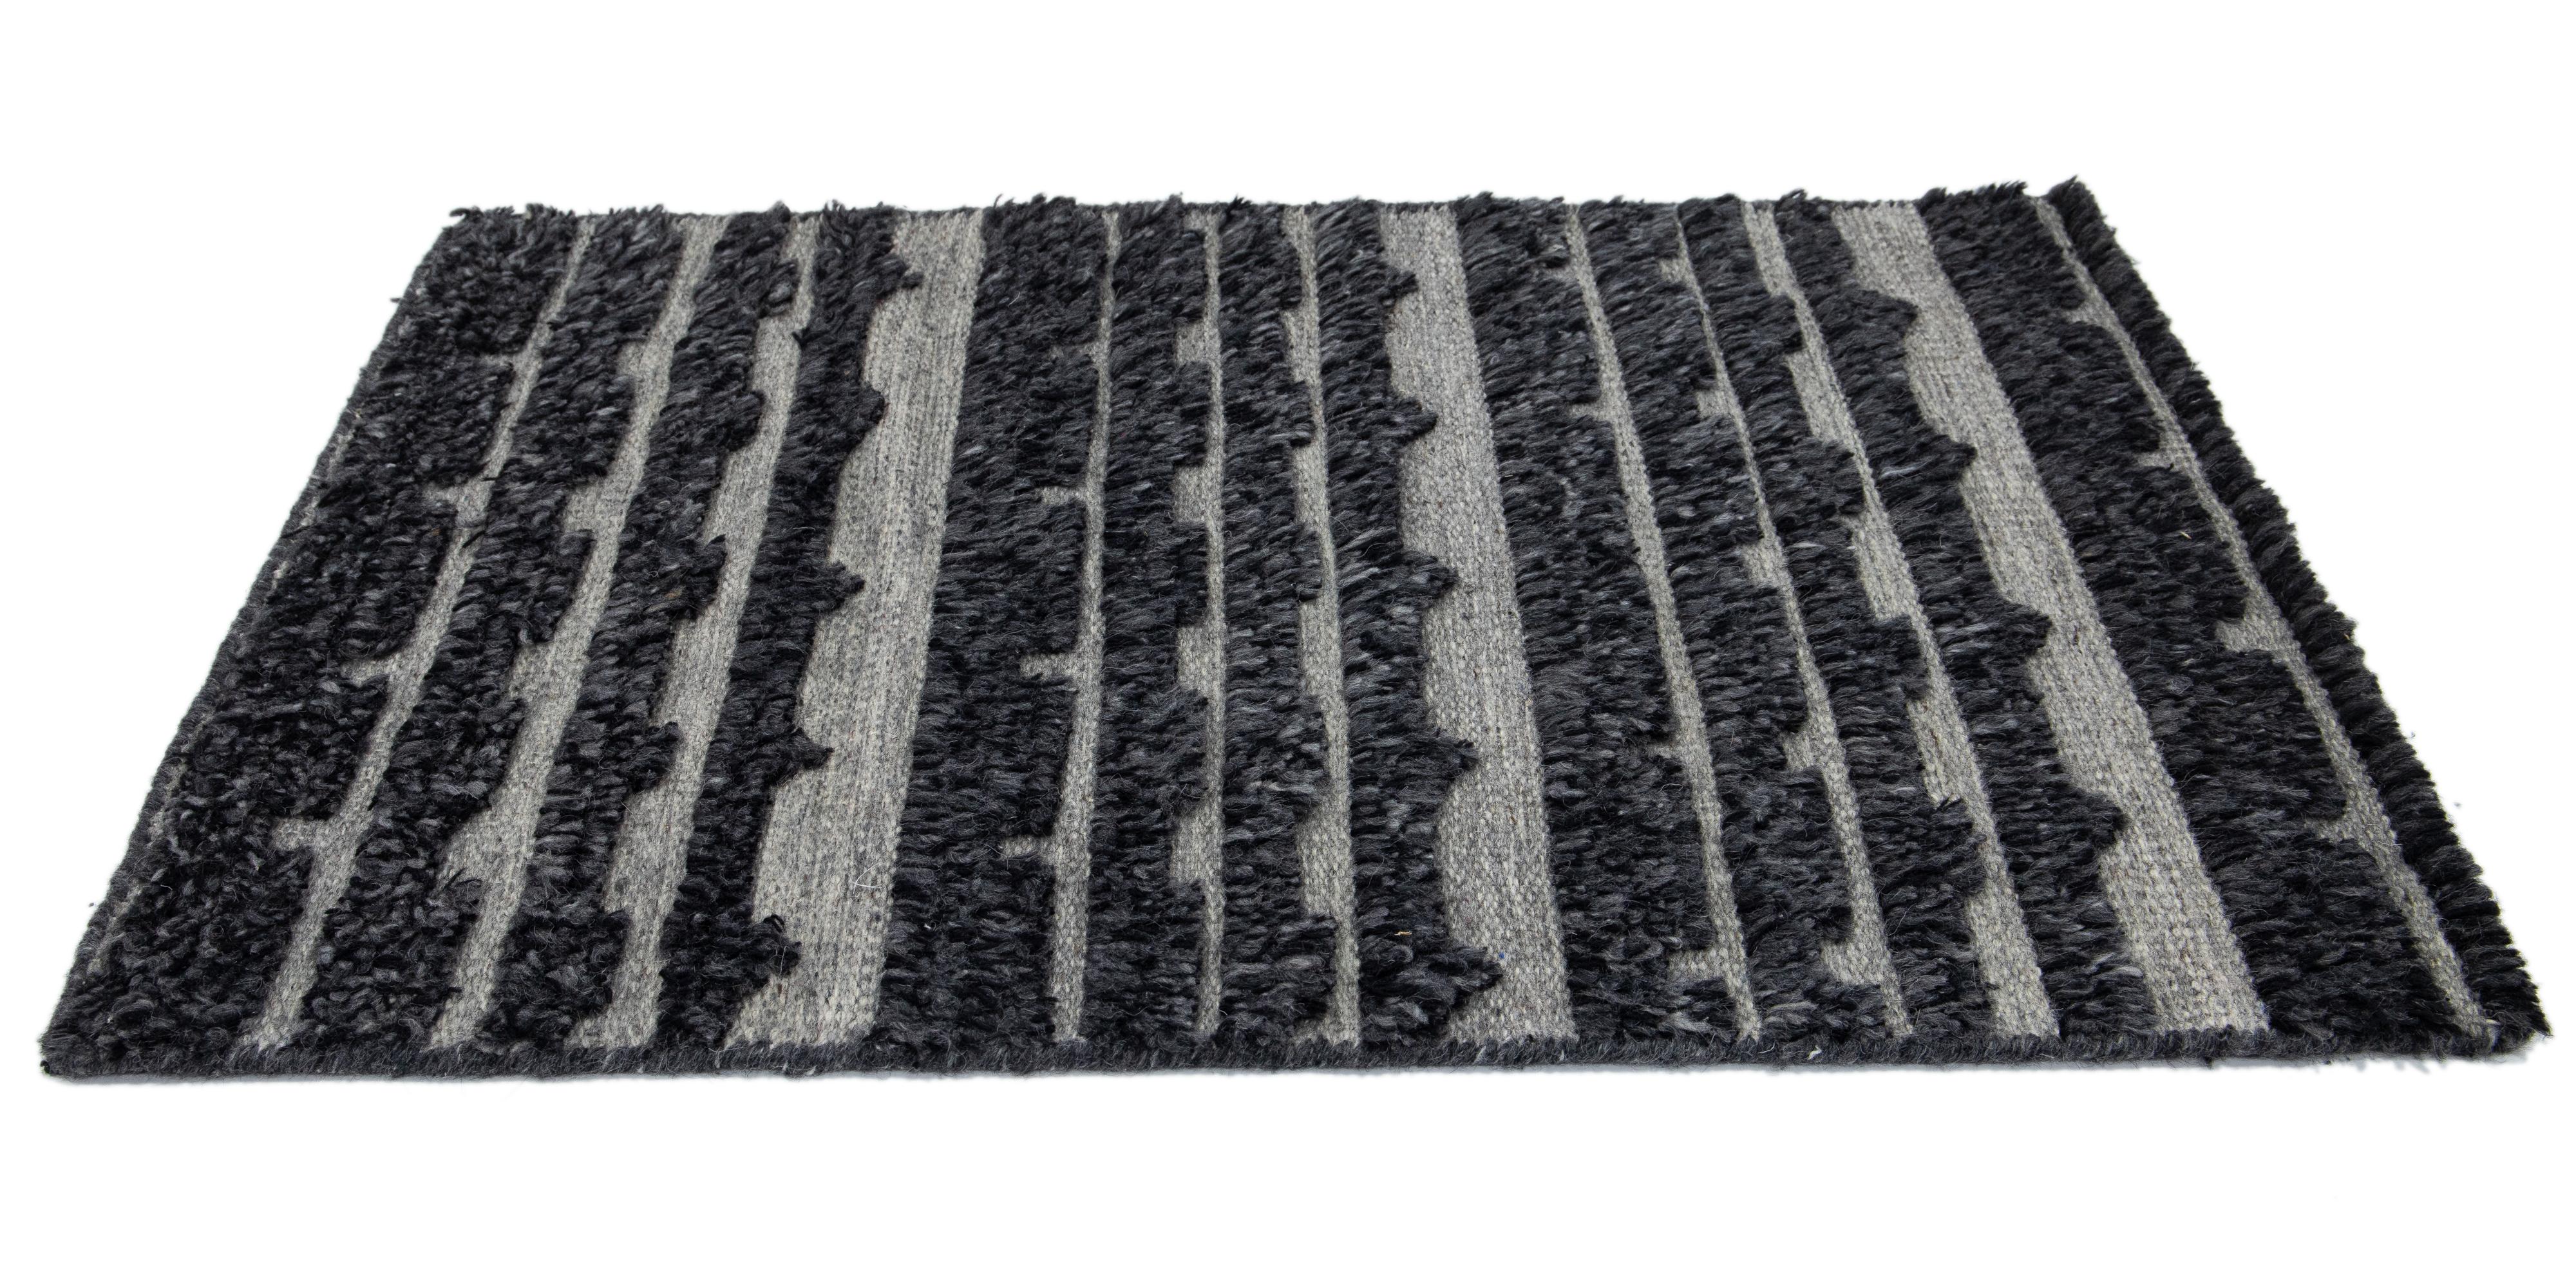 Apadana's Modern Moroccan style wool custom rug. Custom sizes and colors made-to-order. 

Material: Wool 
Techniques: hand-knotted
Style: Moroccan 
Lead time: Approx. 15-16 wks available 
Colors: As shown, other custom colors are available.